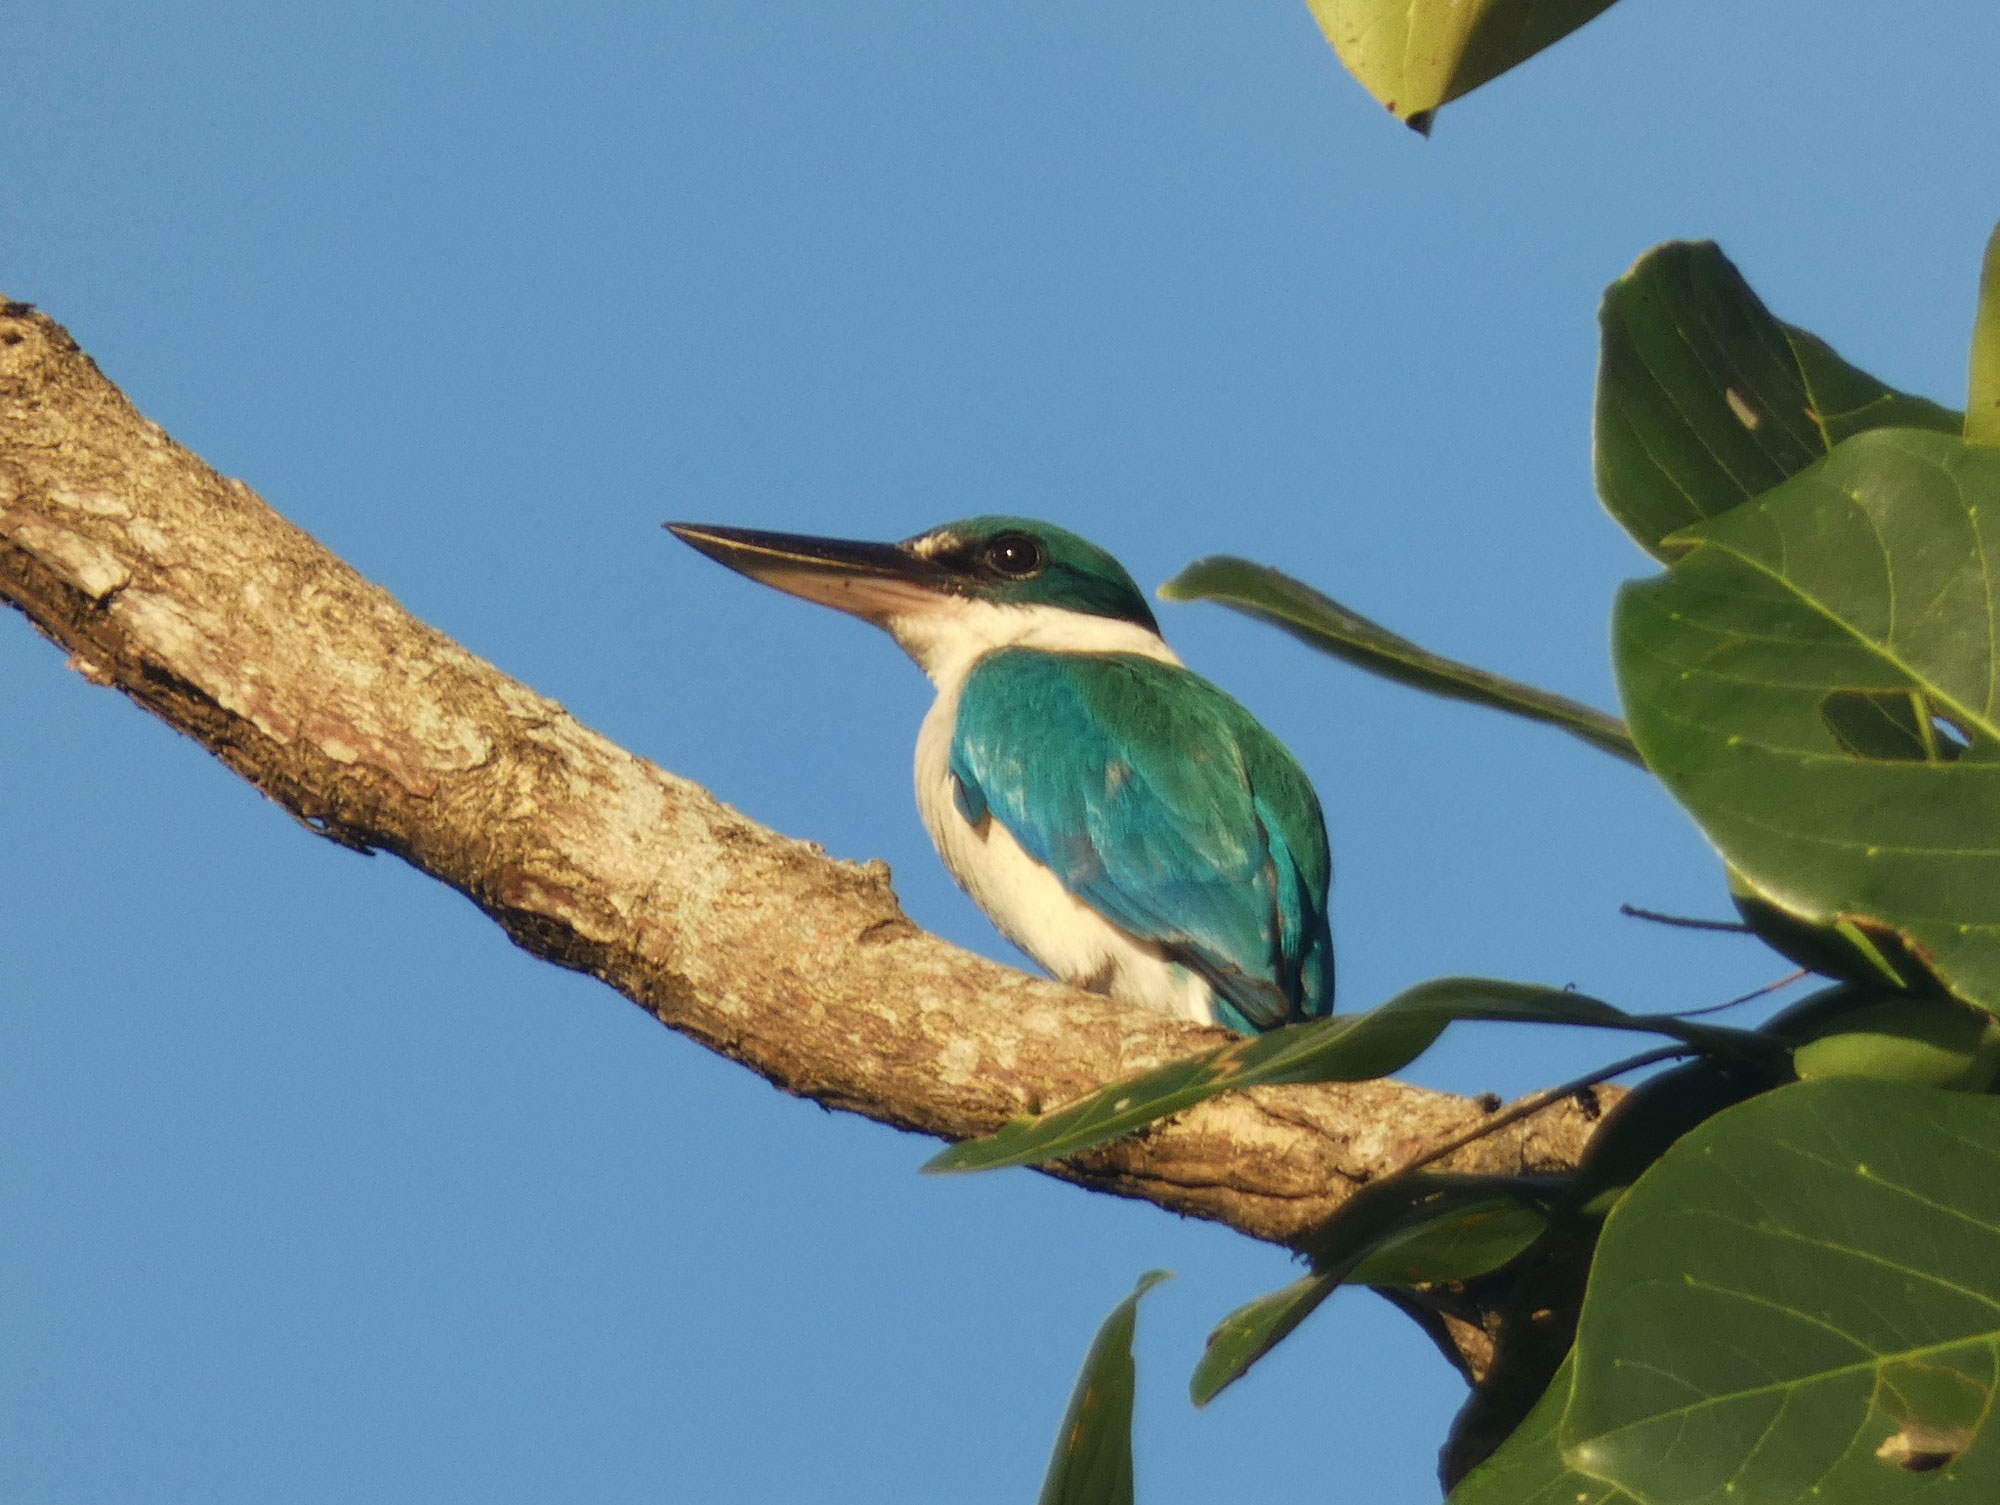 Photograph of a collared kingfisher perched on a thick branch. The photo shows a bird with a blue head and blue wings and back, a white chin and breast, and a white neck. It has a large black beak.